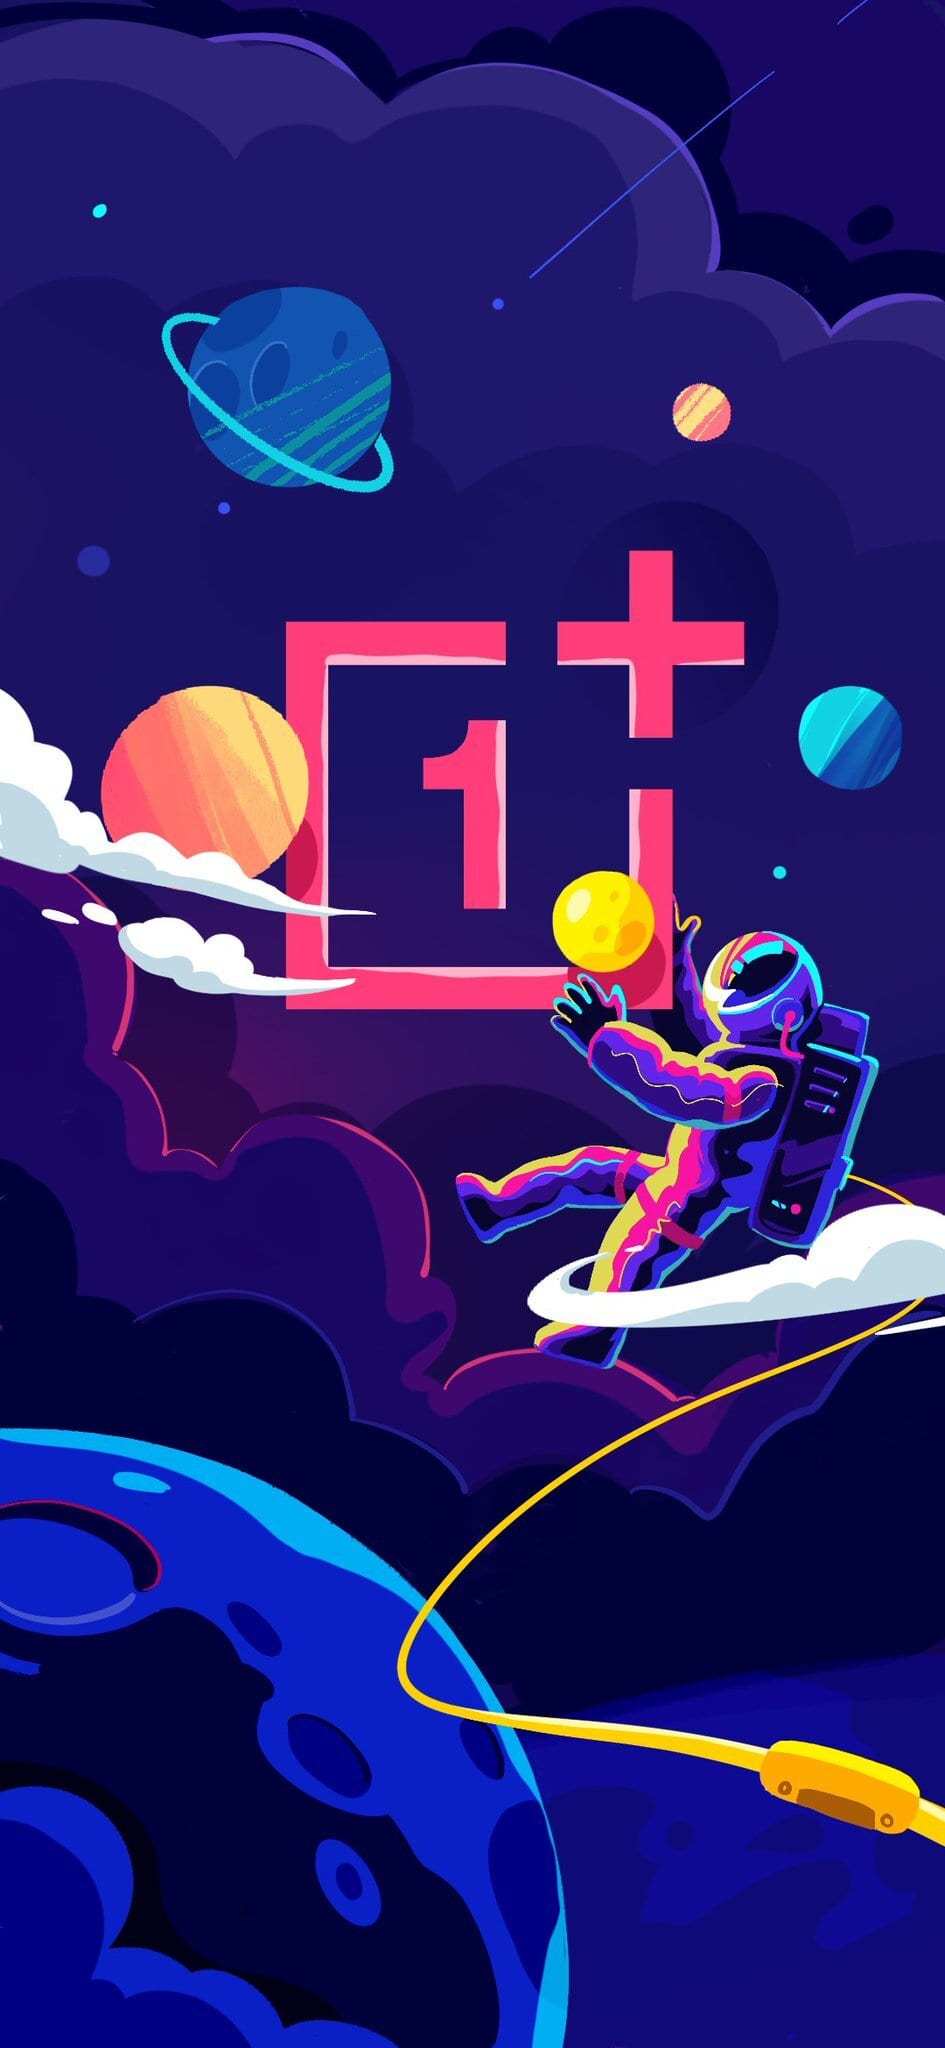 Download new OnePlus wallpaper w/ colorful new logo